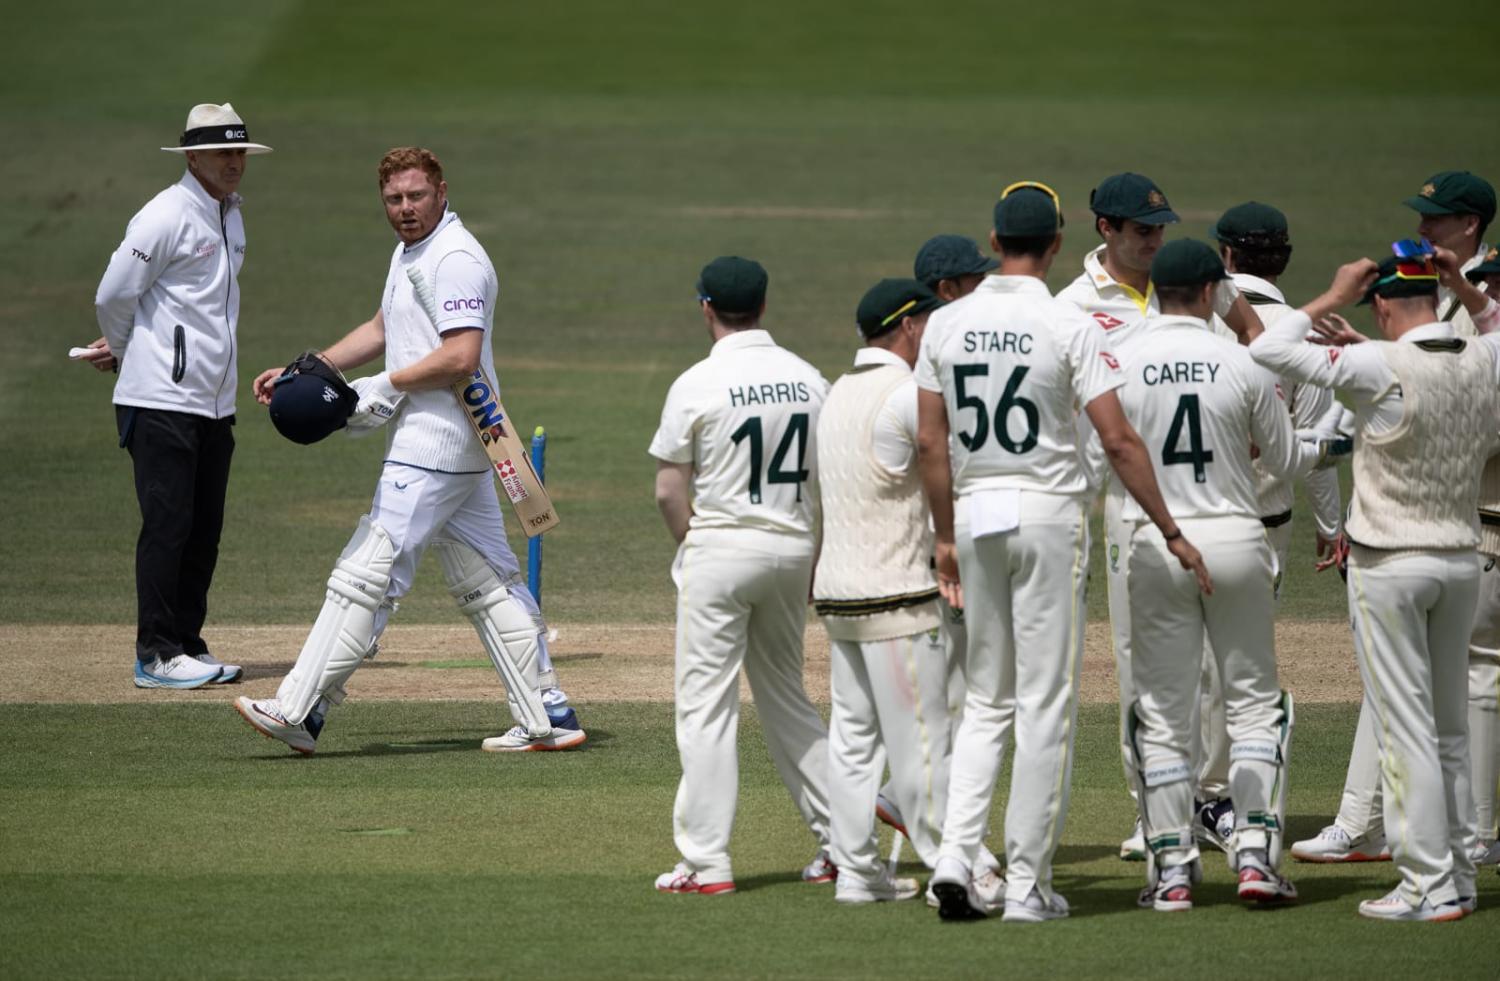 Jonny Bairstow of England walks off the pitch after being stumped by Alex Carey of Australia during the 5th day of the Ashes Test Match at Lord's Cricket Ground (Visionhaus/Getty Images)